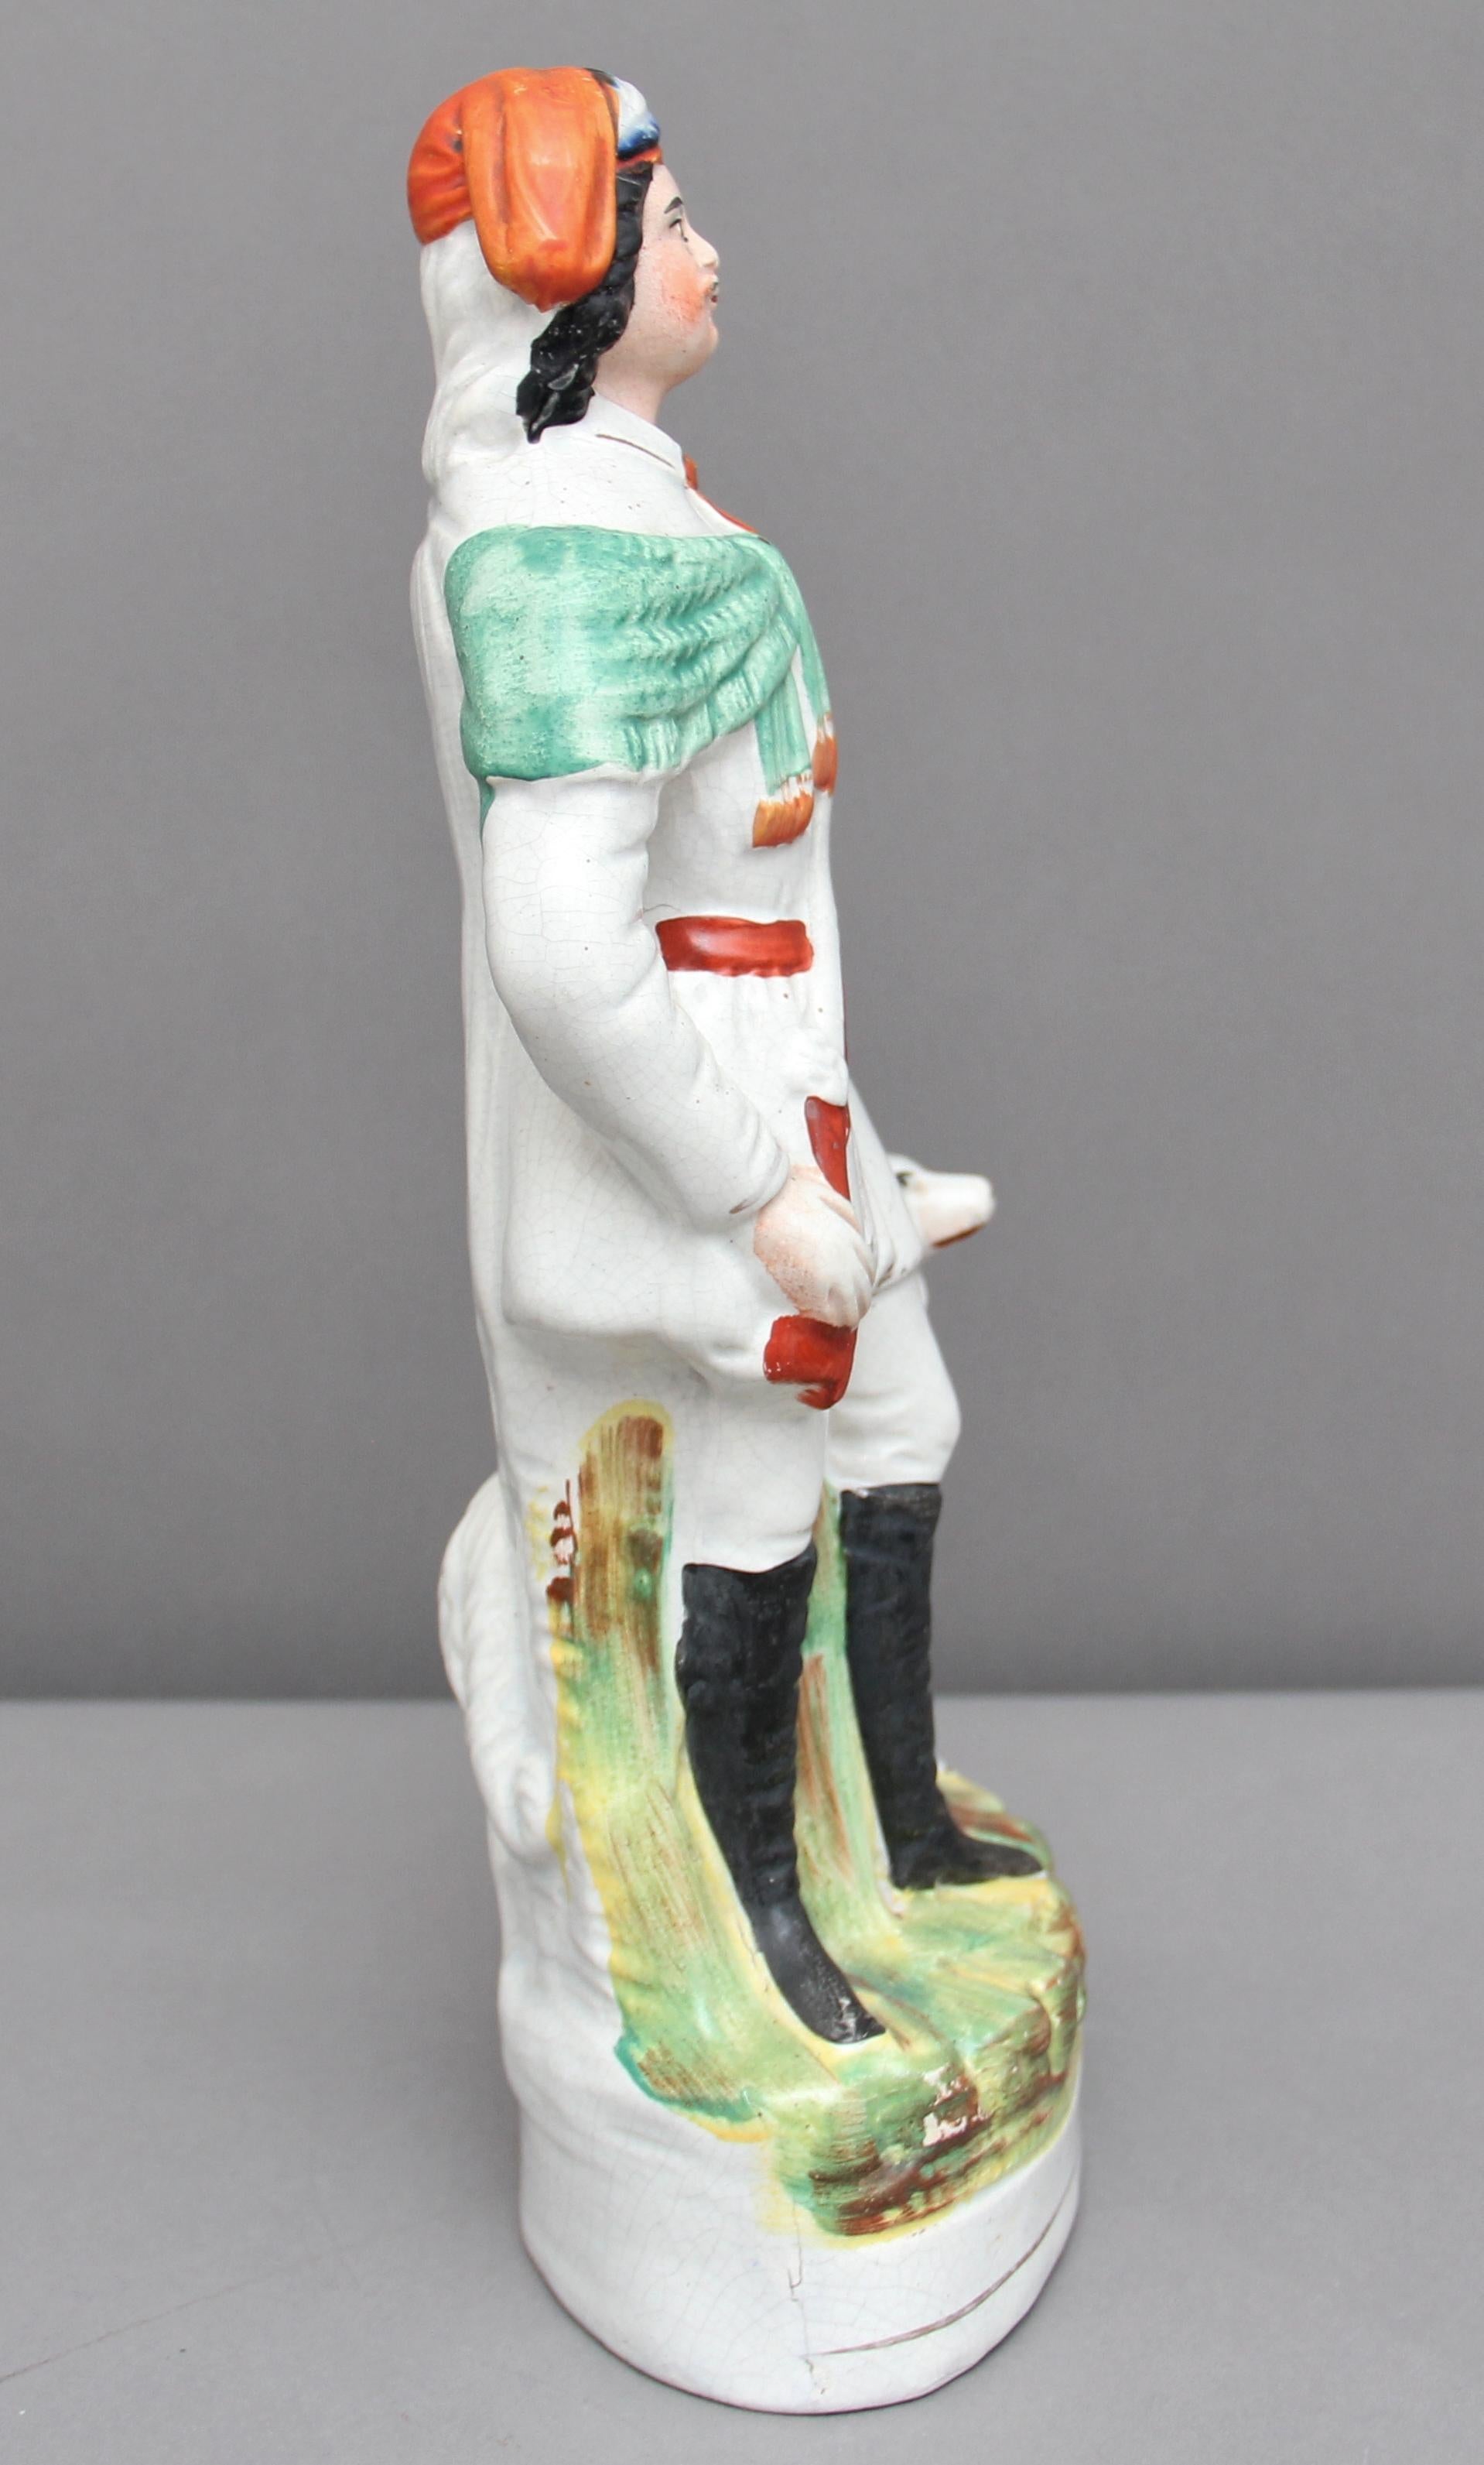 19th century Staffordshire figure of Roualeyn George Gordon-Cumming, a Scottish traveller and sportsman, known as the “lion hunter” In good condition and has a lovely color, circa 1850.

 